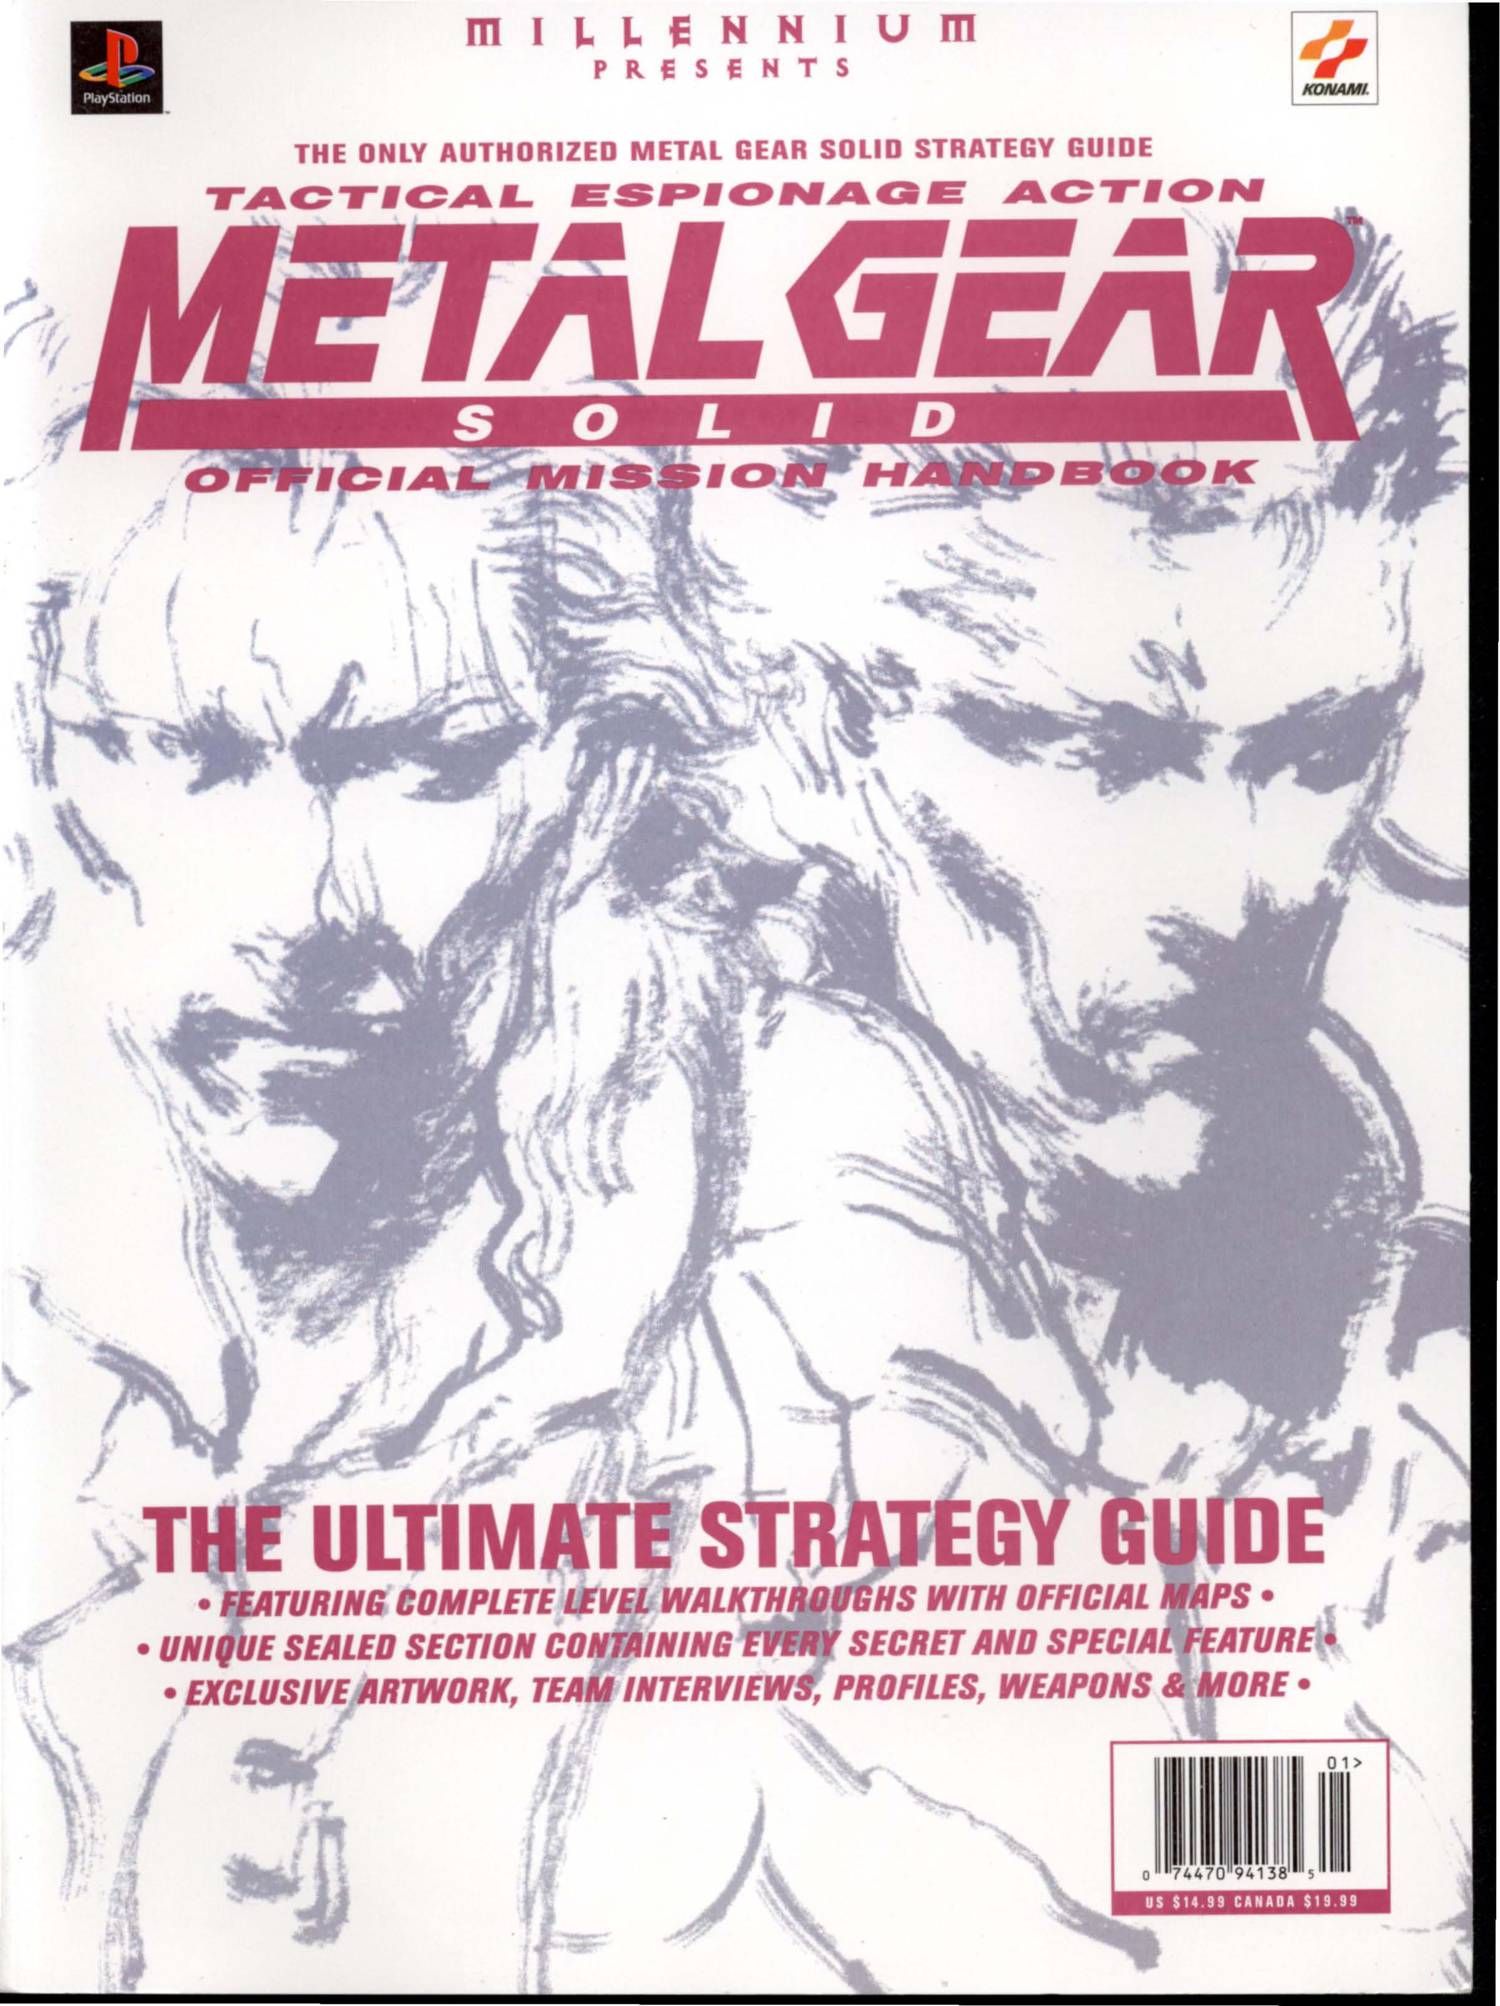 Metal Gear Solid Official Mission Handbook.pdf | DocDroid